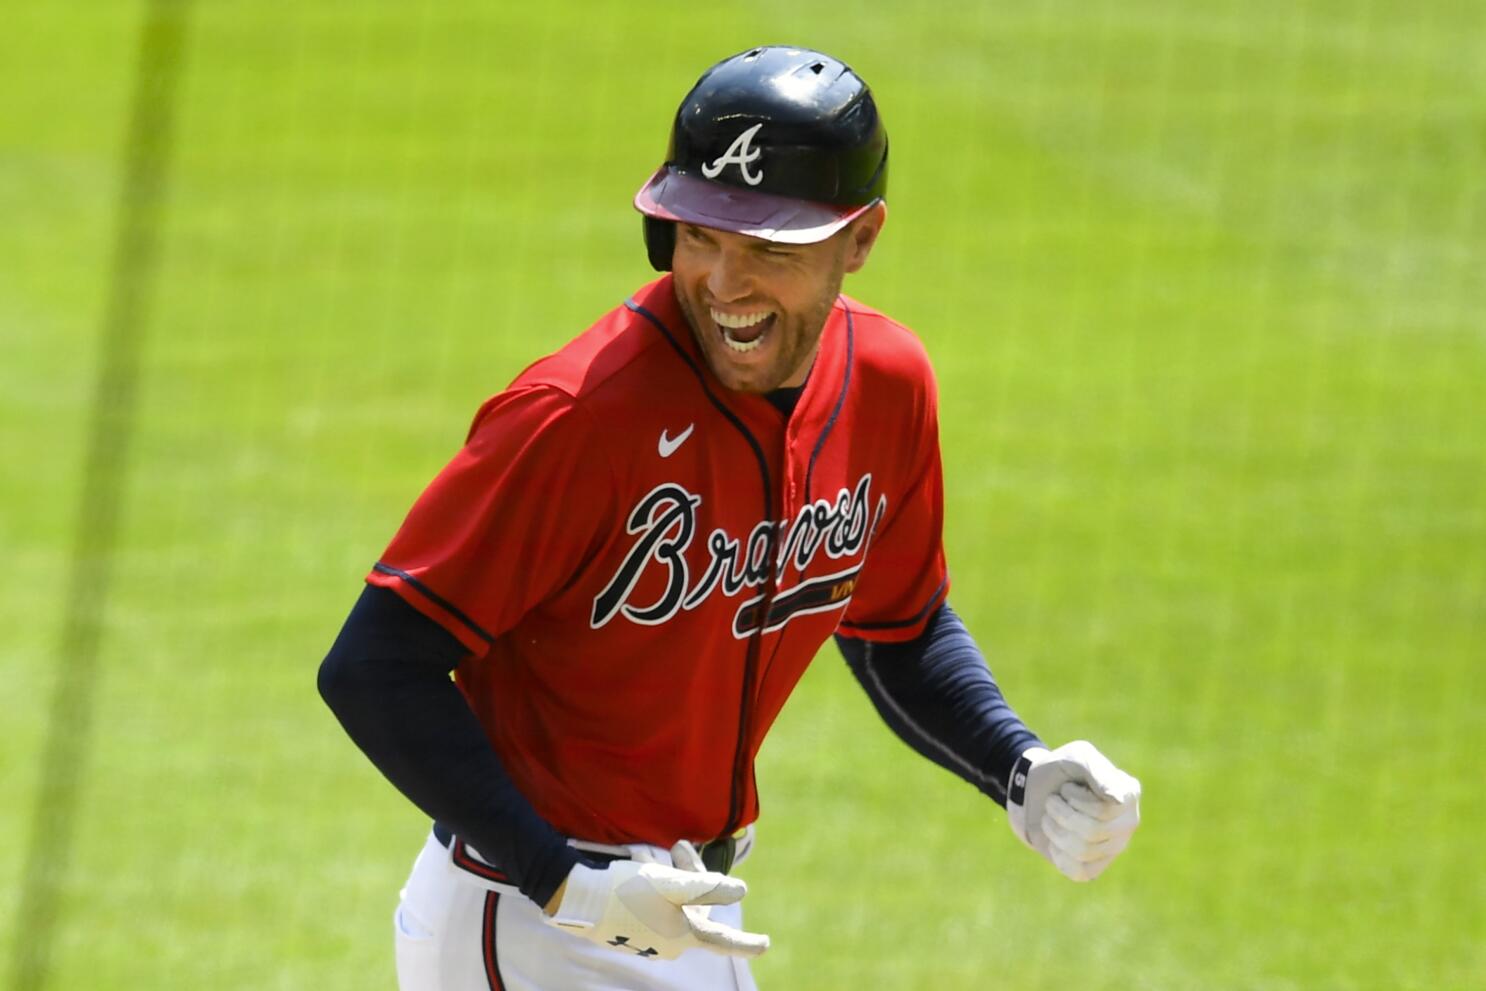 Braves' Freeman celebrates his new baby 'twins with a twist' - The